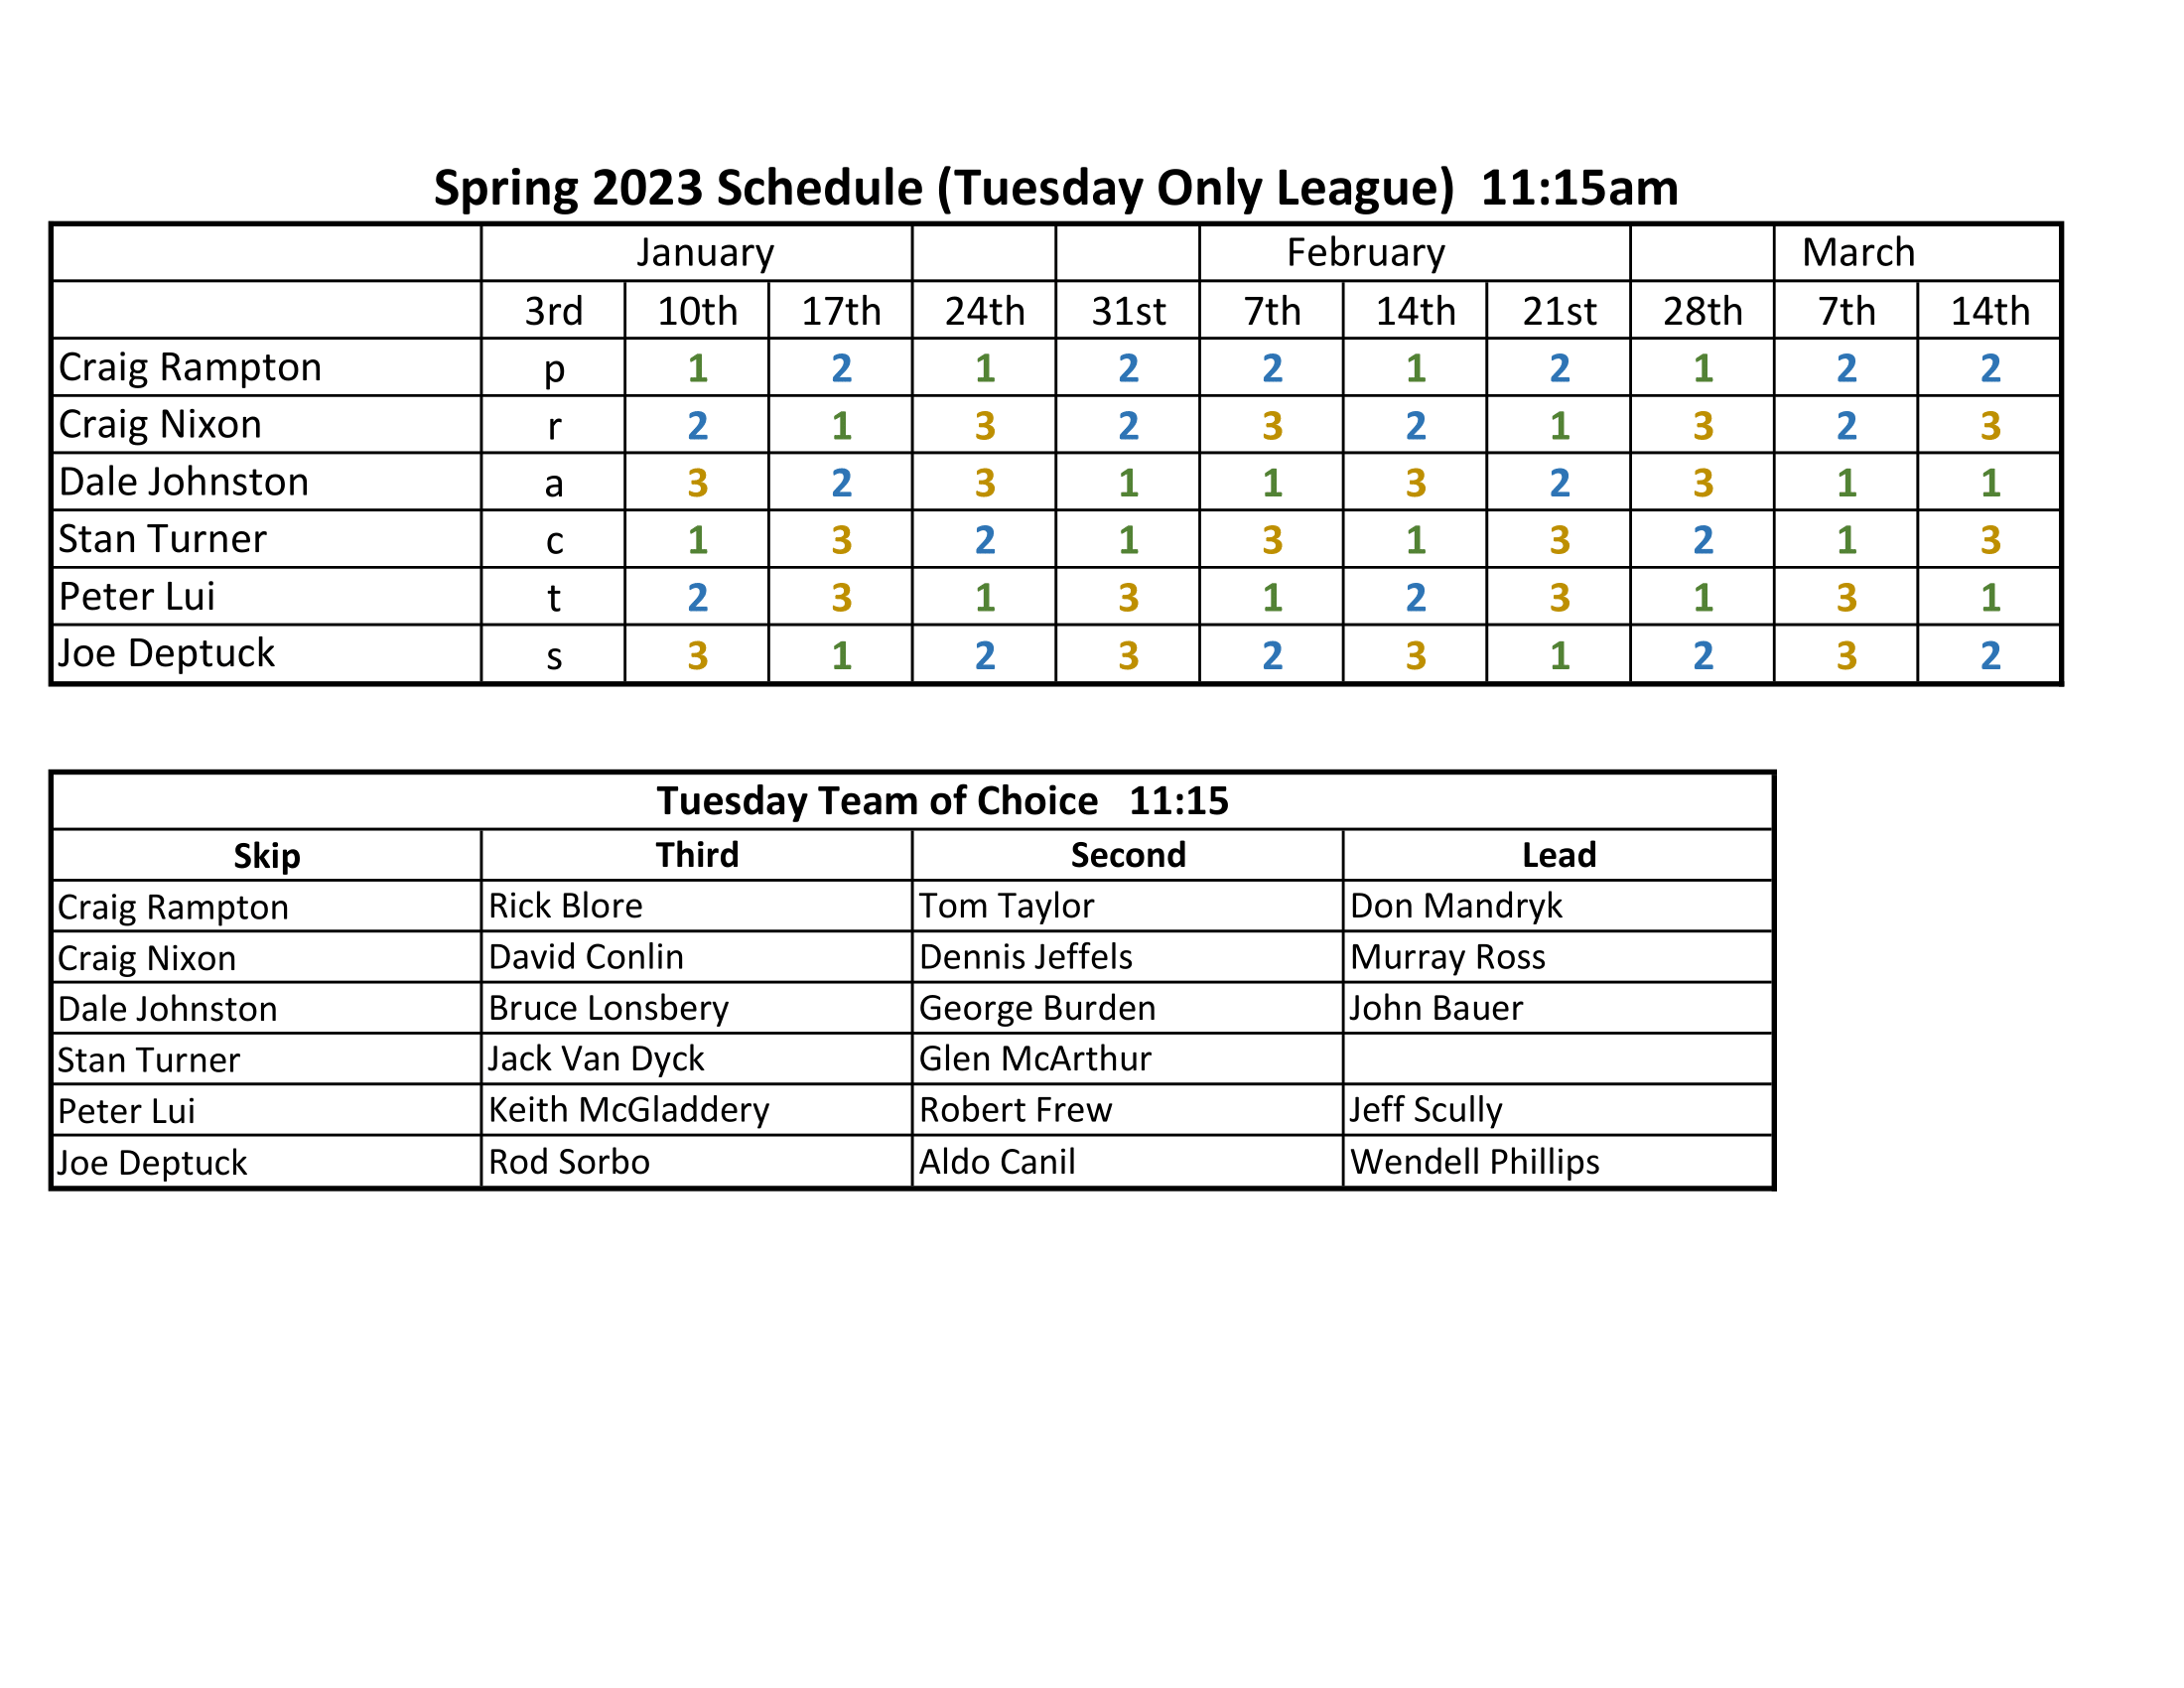 Spring 2023 Schedule Tue Only 1